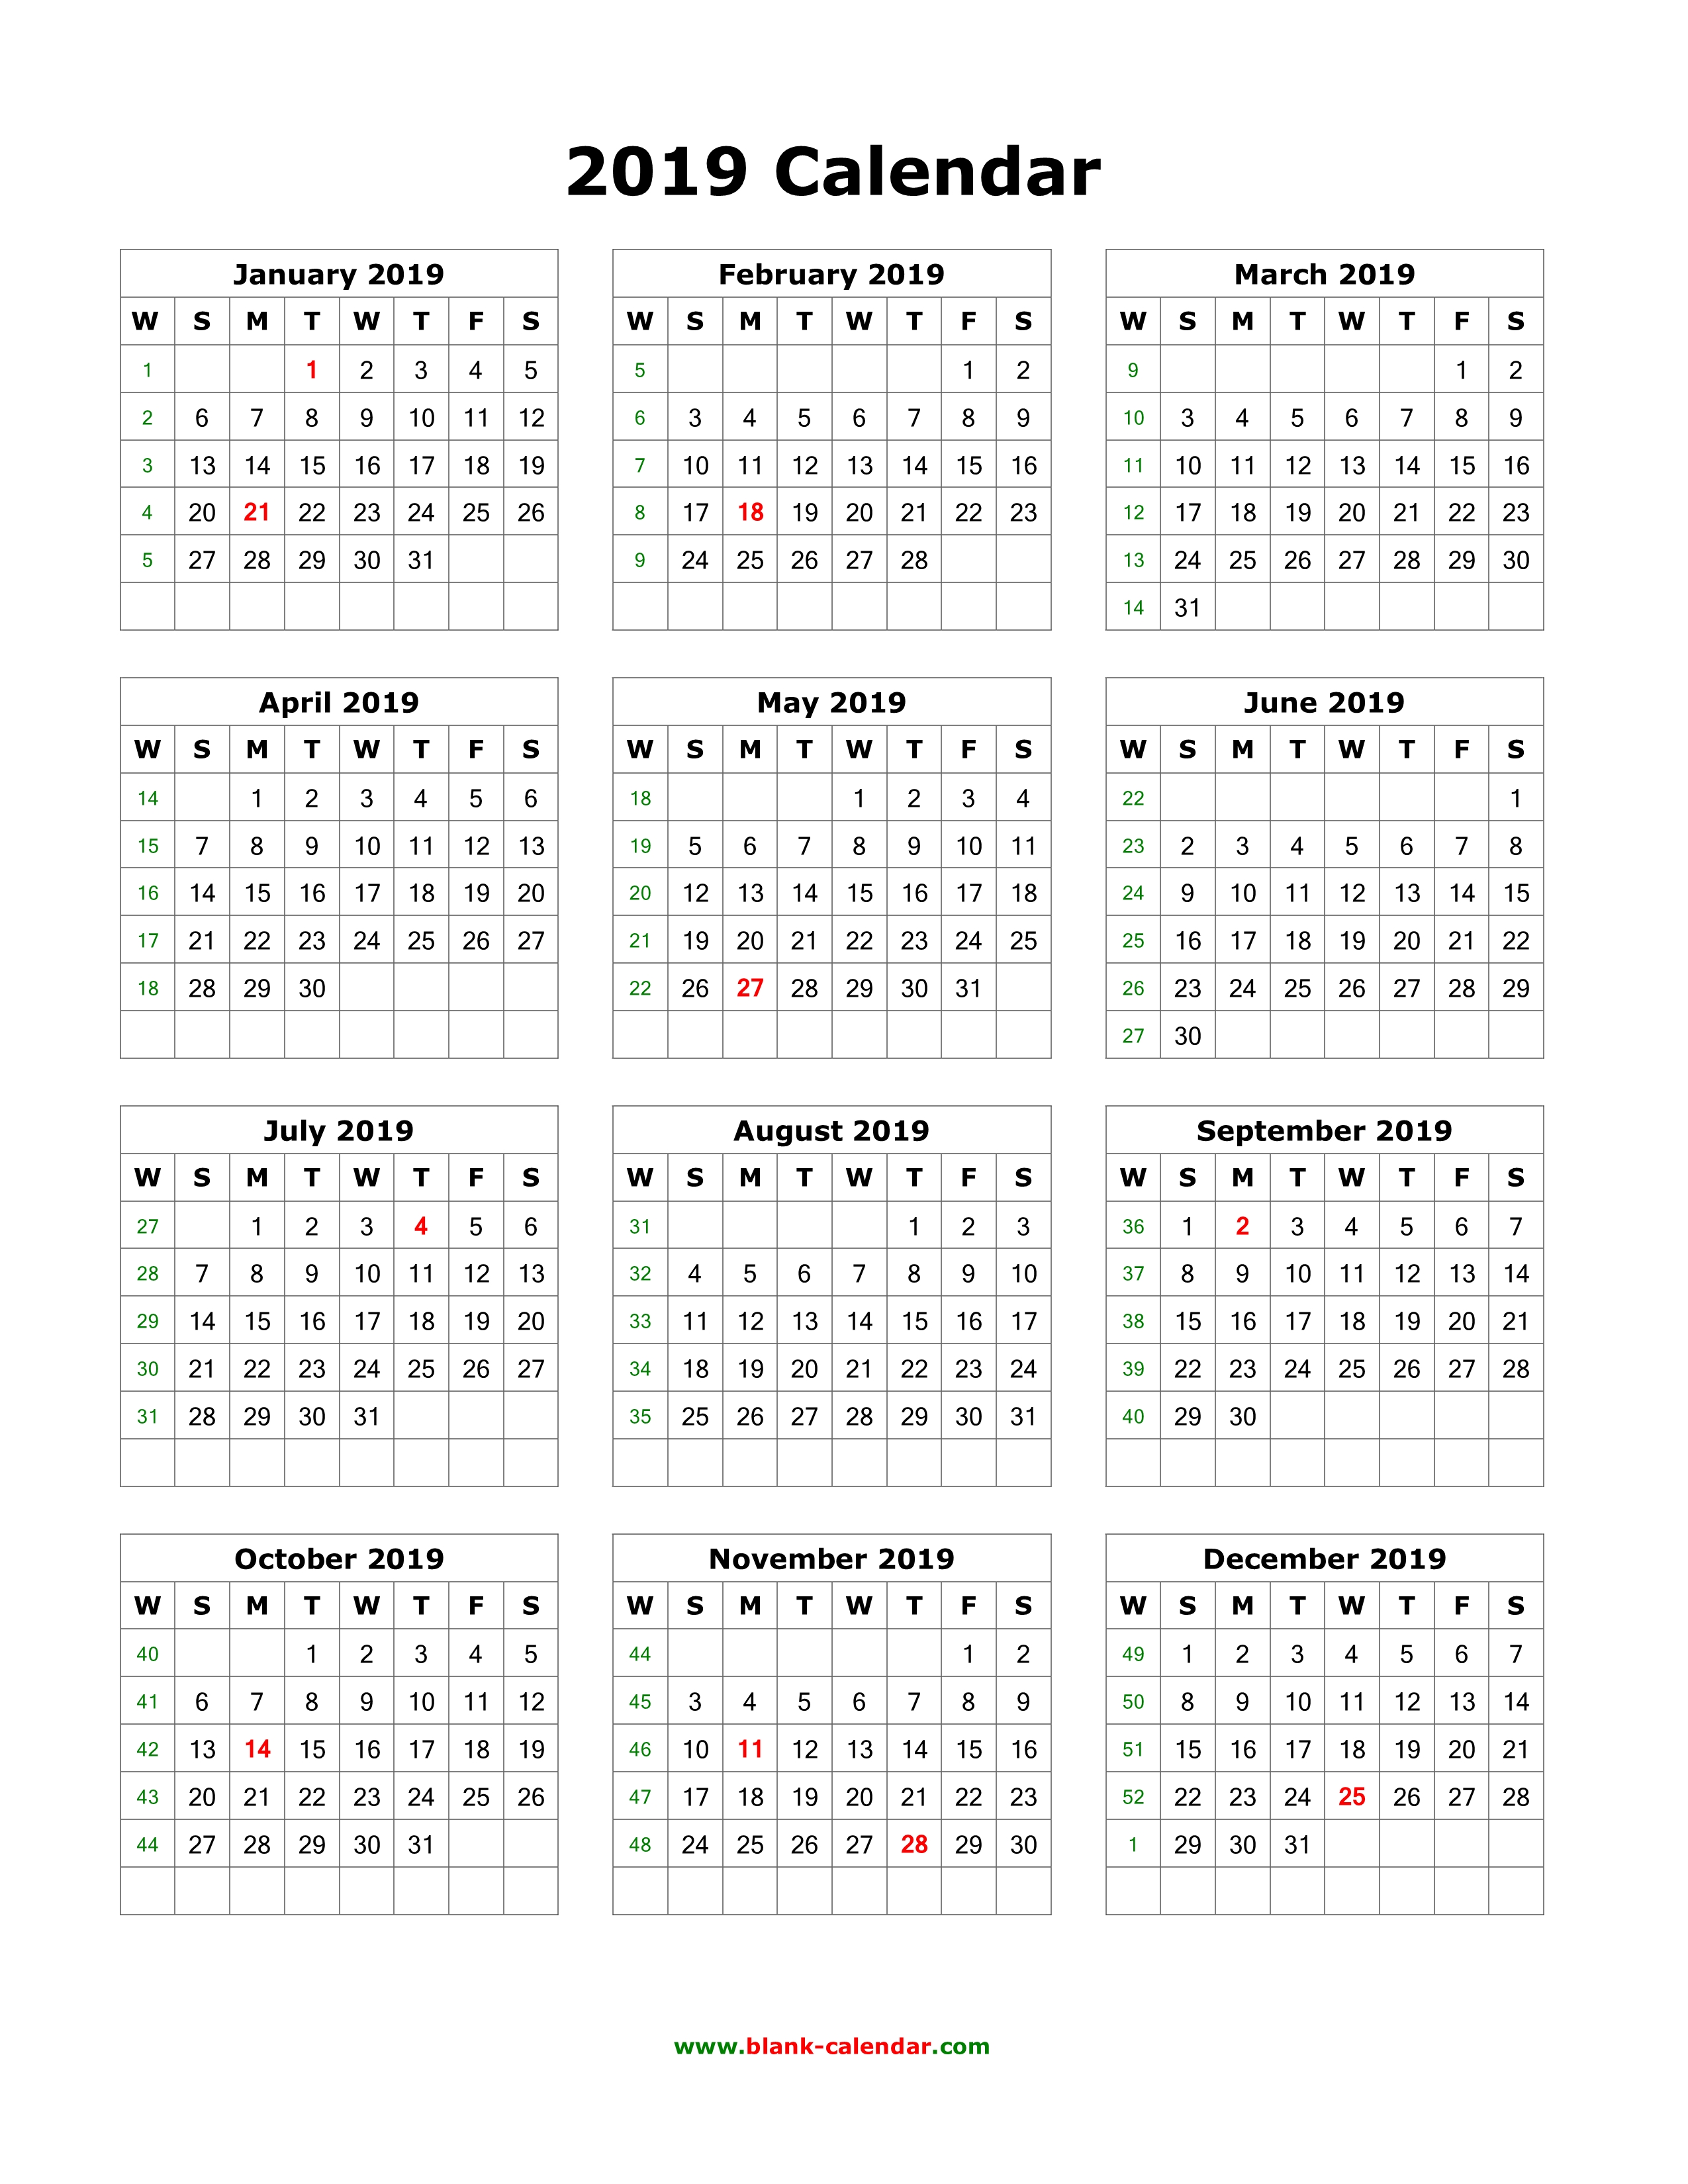 Download Blank Calendar 2019 12 Months On One Page Vertical